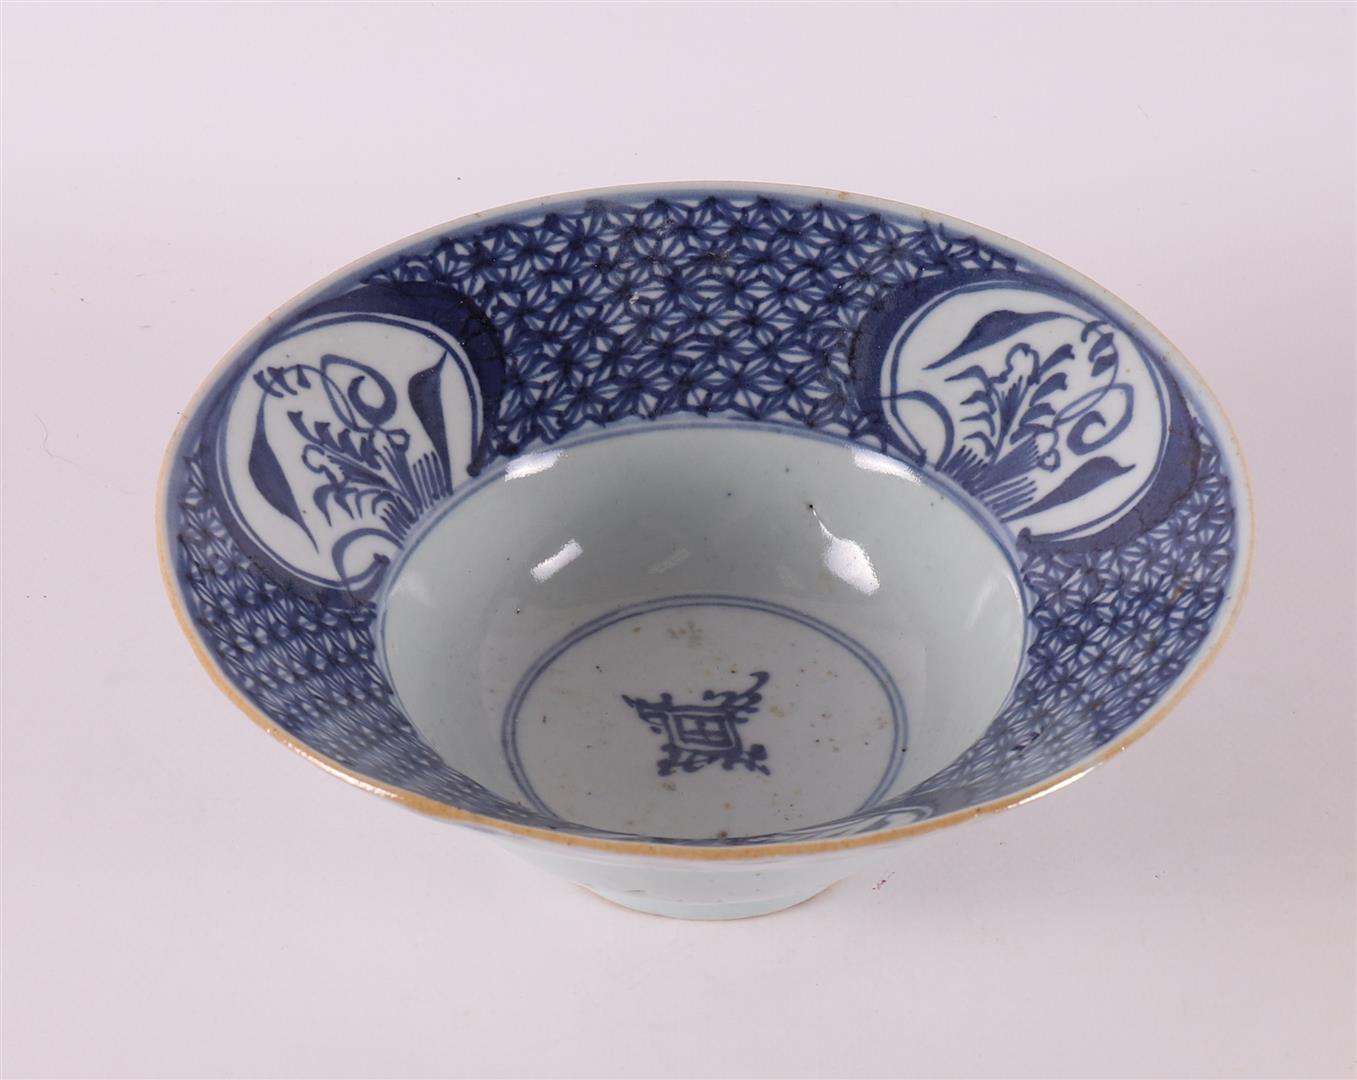 A blue and white porcelain hooded bowl. China, 'so-called Kitchen Ming', 17th ce